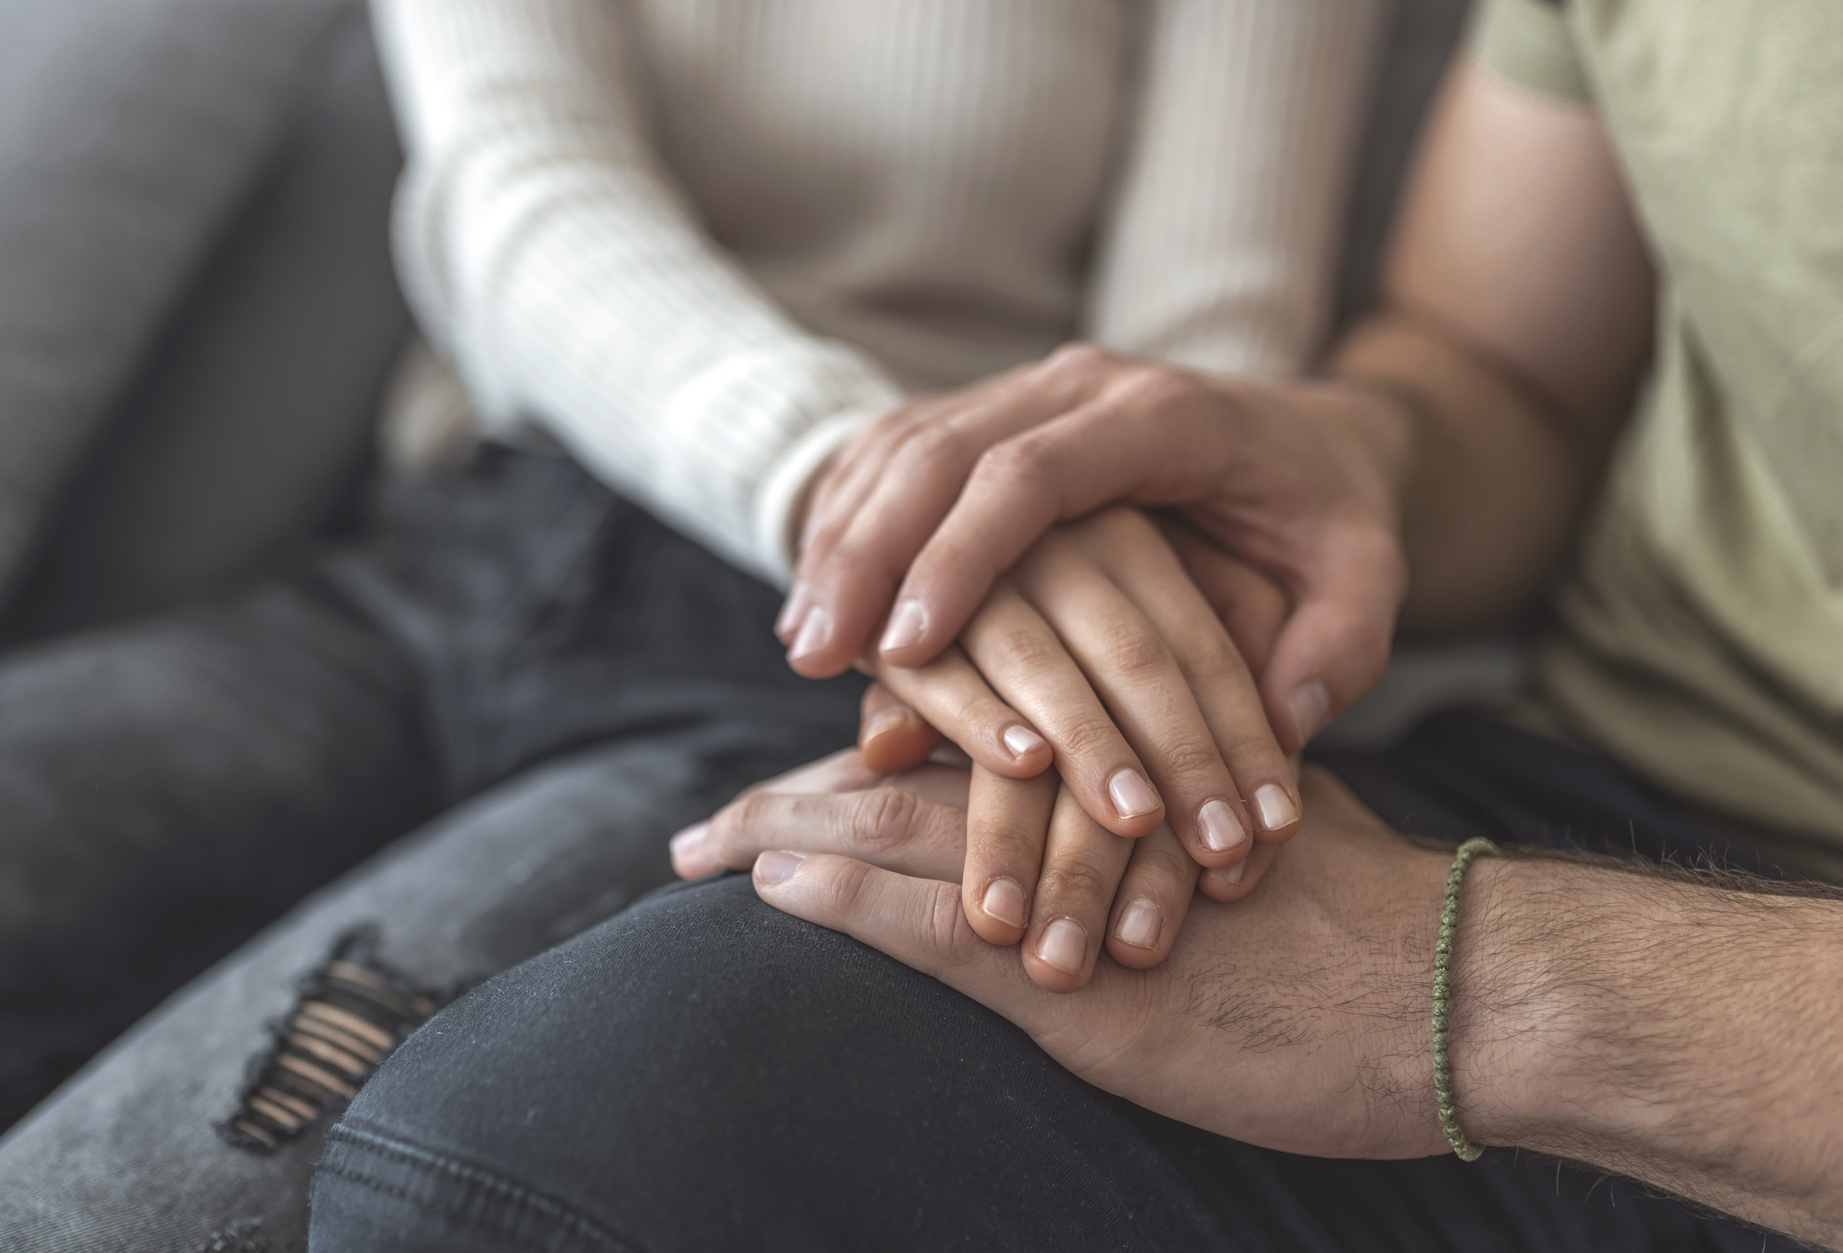 support group hands, megan hladilek, part two we don't talk about miscarriages, patient experience with miscarriage, 5 responses to someone having a miscarriage, how to support someone after miscarriage